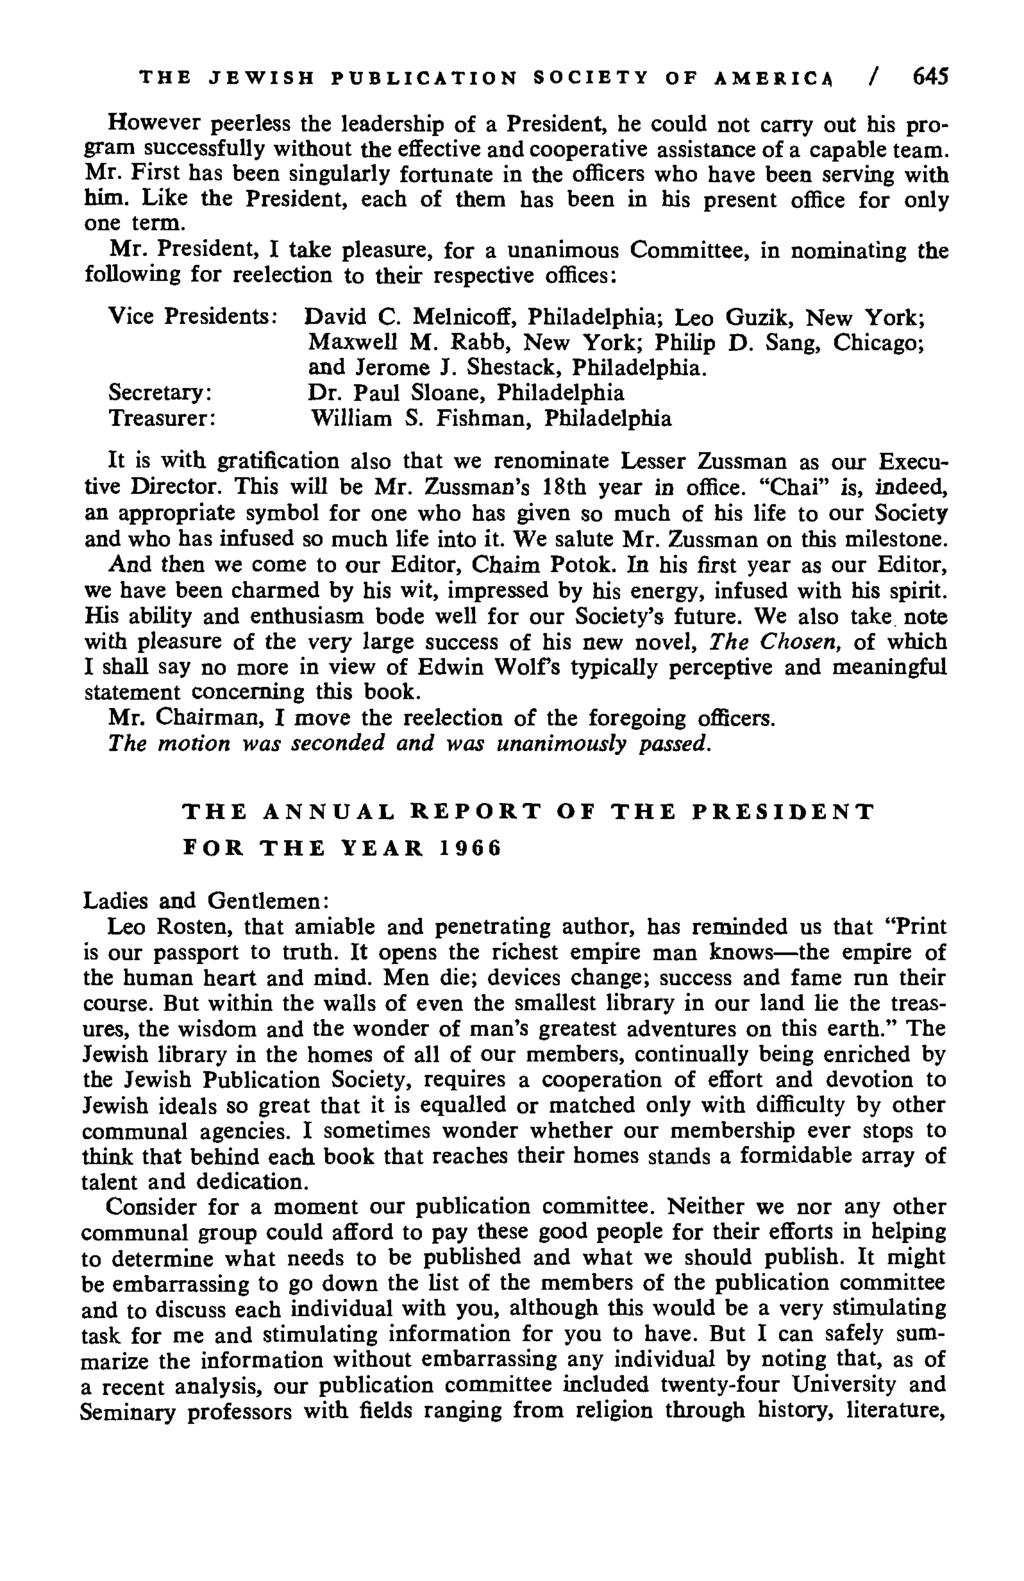 THE JEWISH PUBLICATION SOCIETY OF AMERICA / 645 However peerless the leadership of a President, he could not carry out his program successfully without the effective and cooperative assistance of a